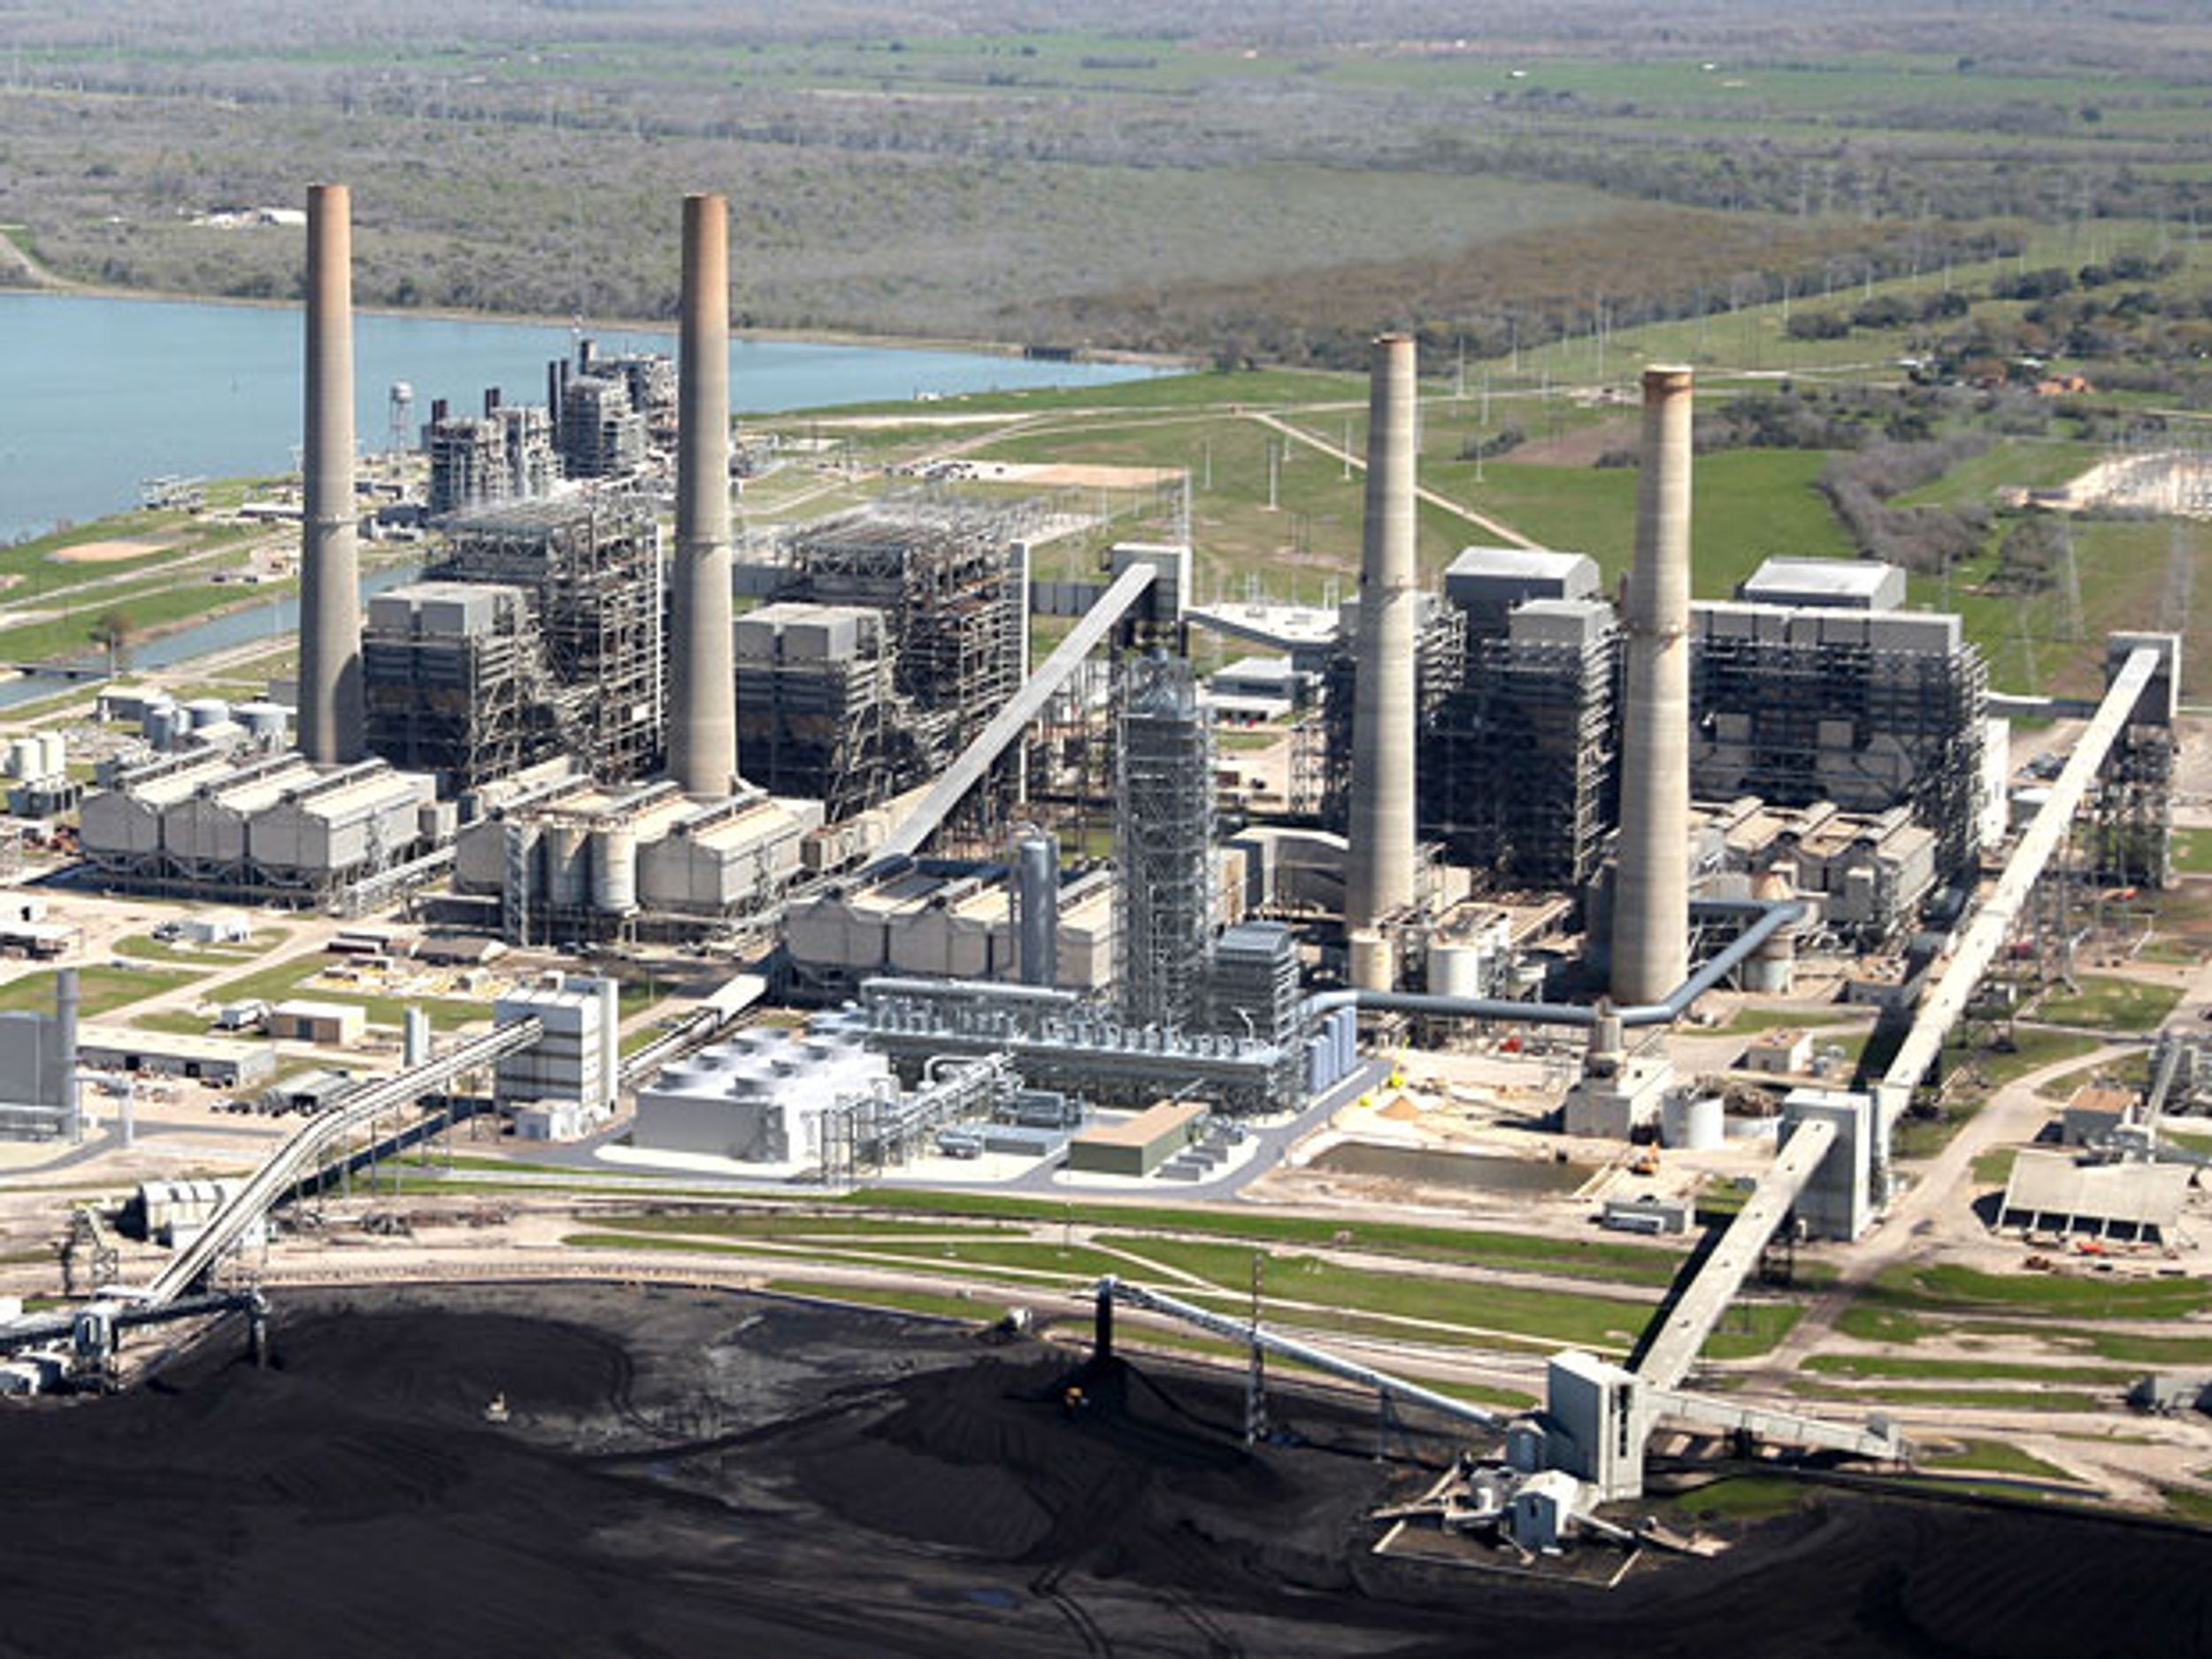 Construction Starts on World's Largest Post-Combustion Carbon Capture Project